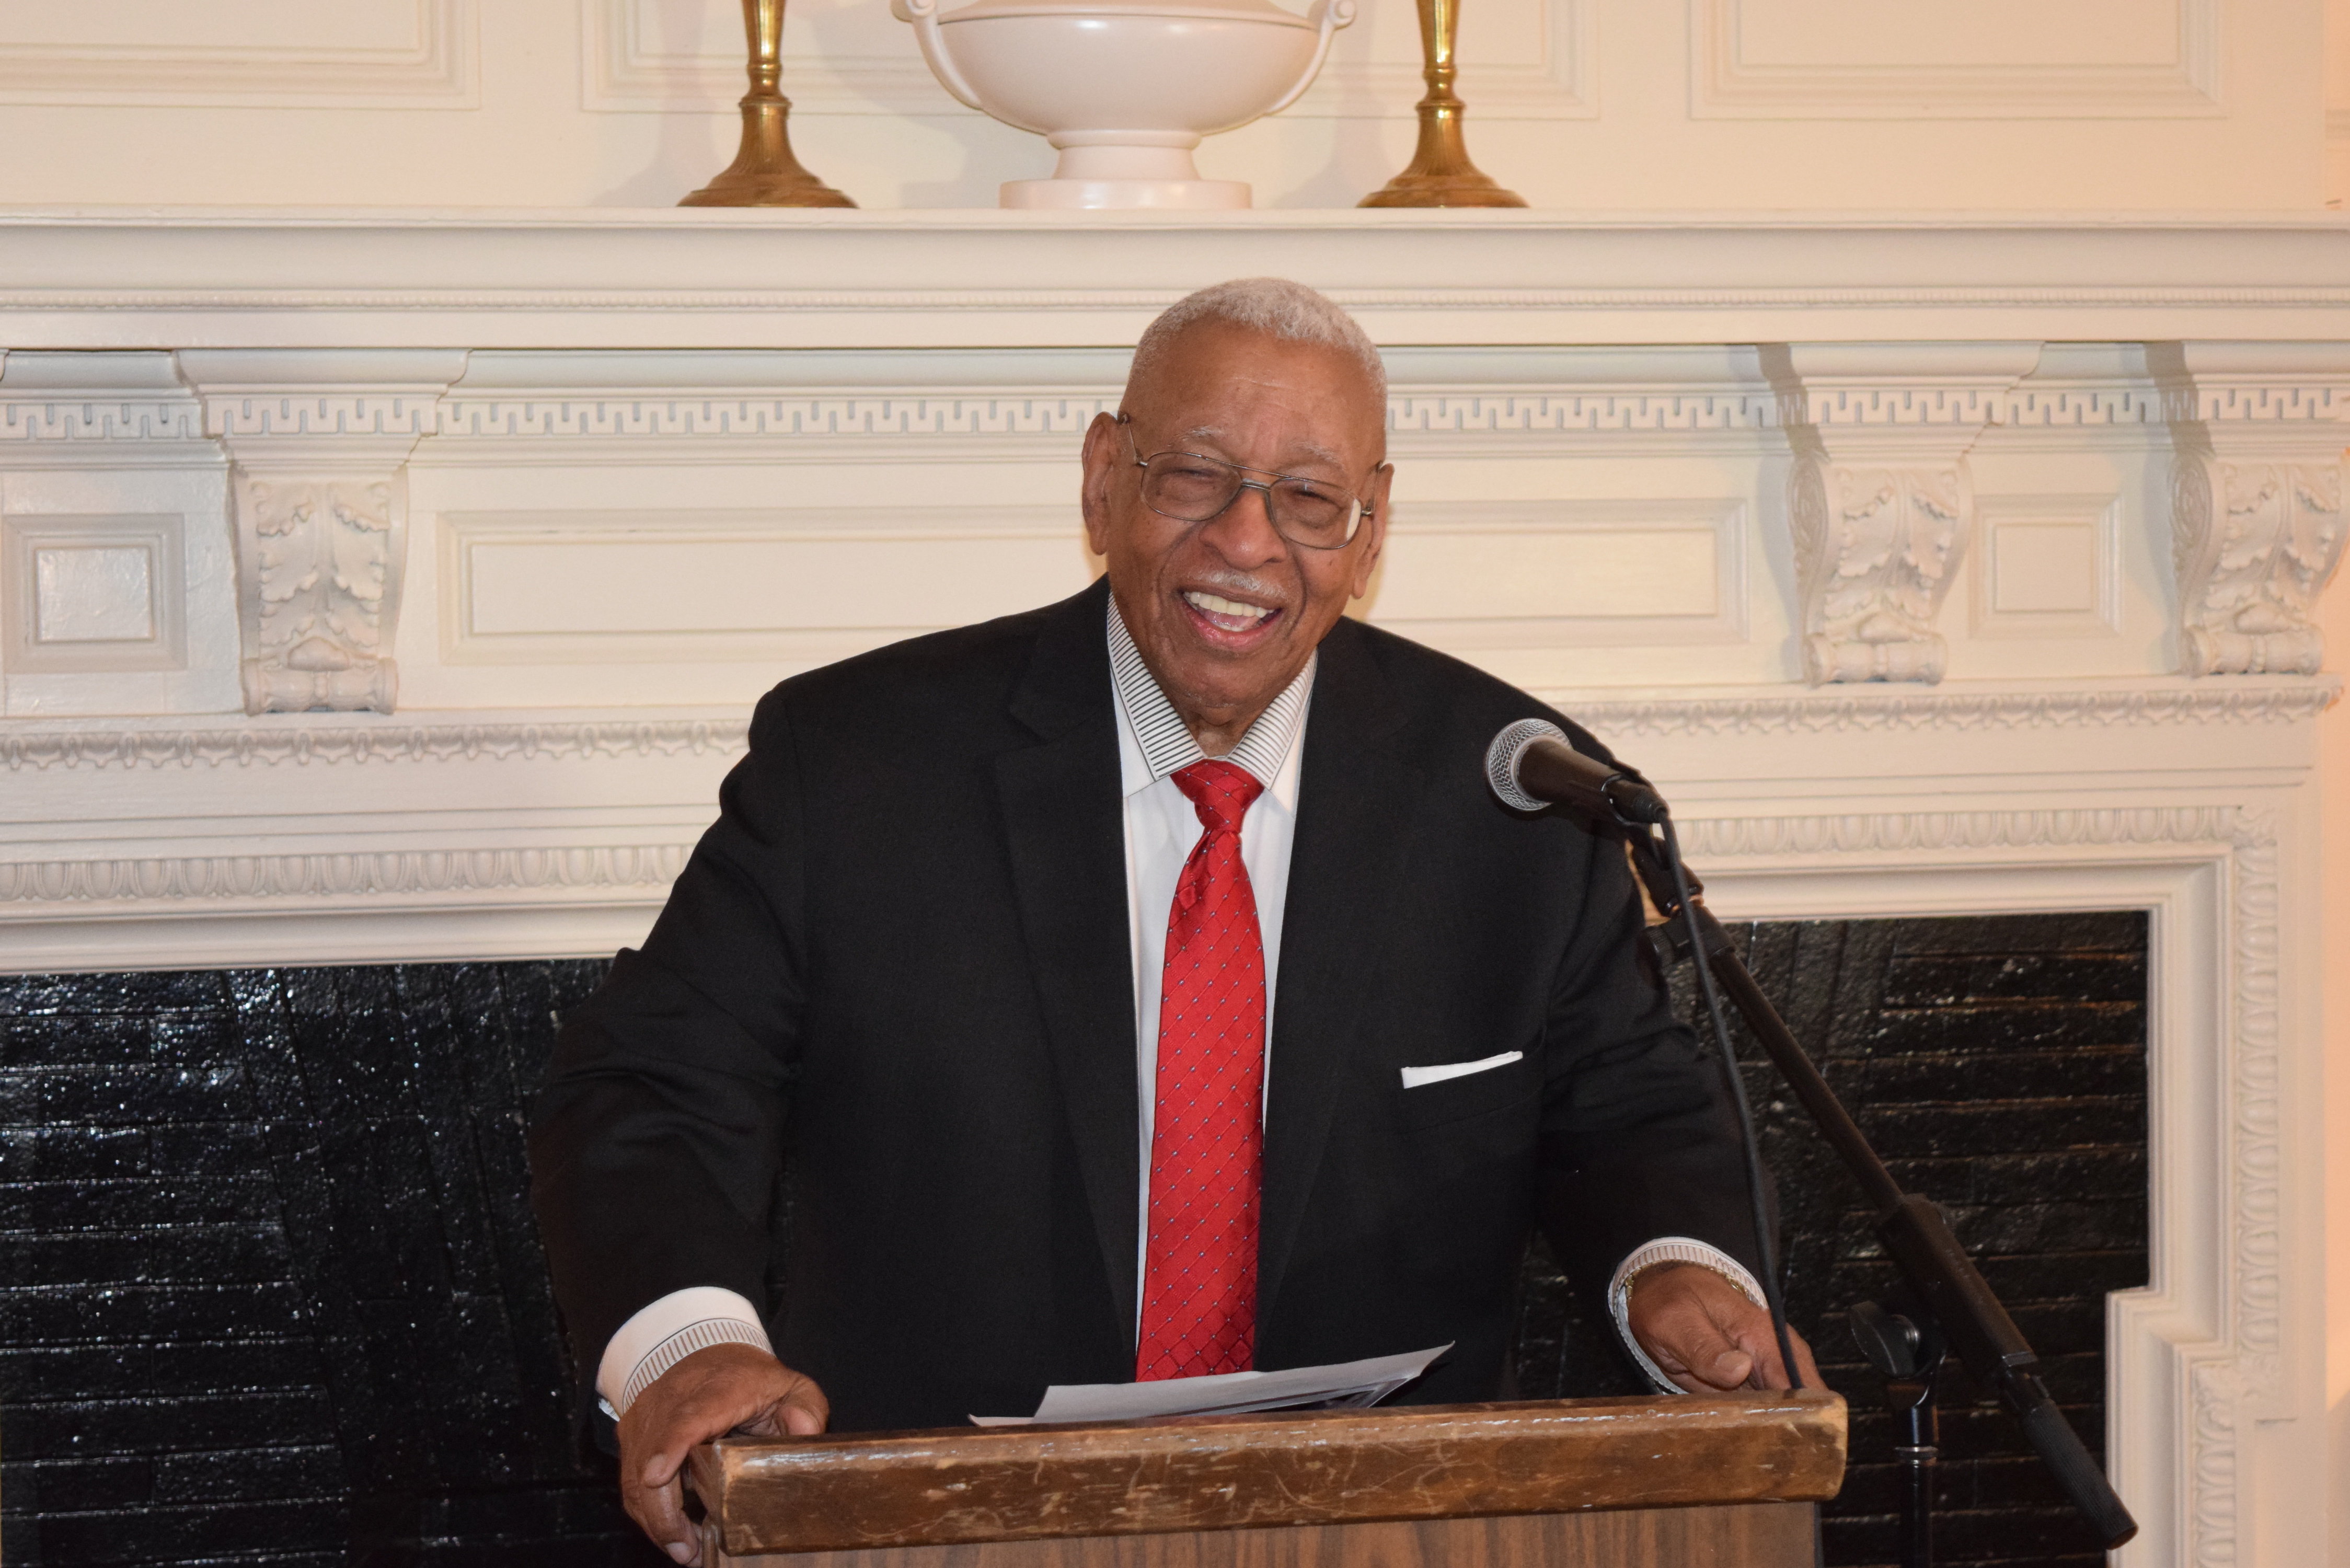 Hon. William C. Thompson was the first black state senator from Brooklyn, the first black administrative judge in Kings County and the first black judge in the Appellate Division Second Department. Eagle file photos by Rob Abruzzese